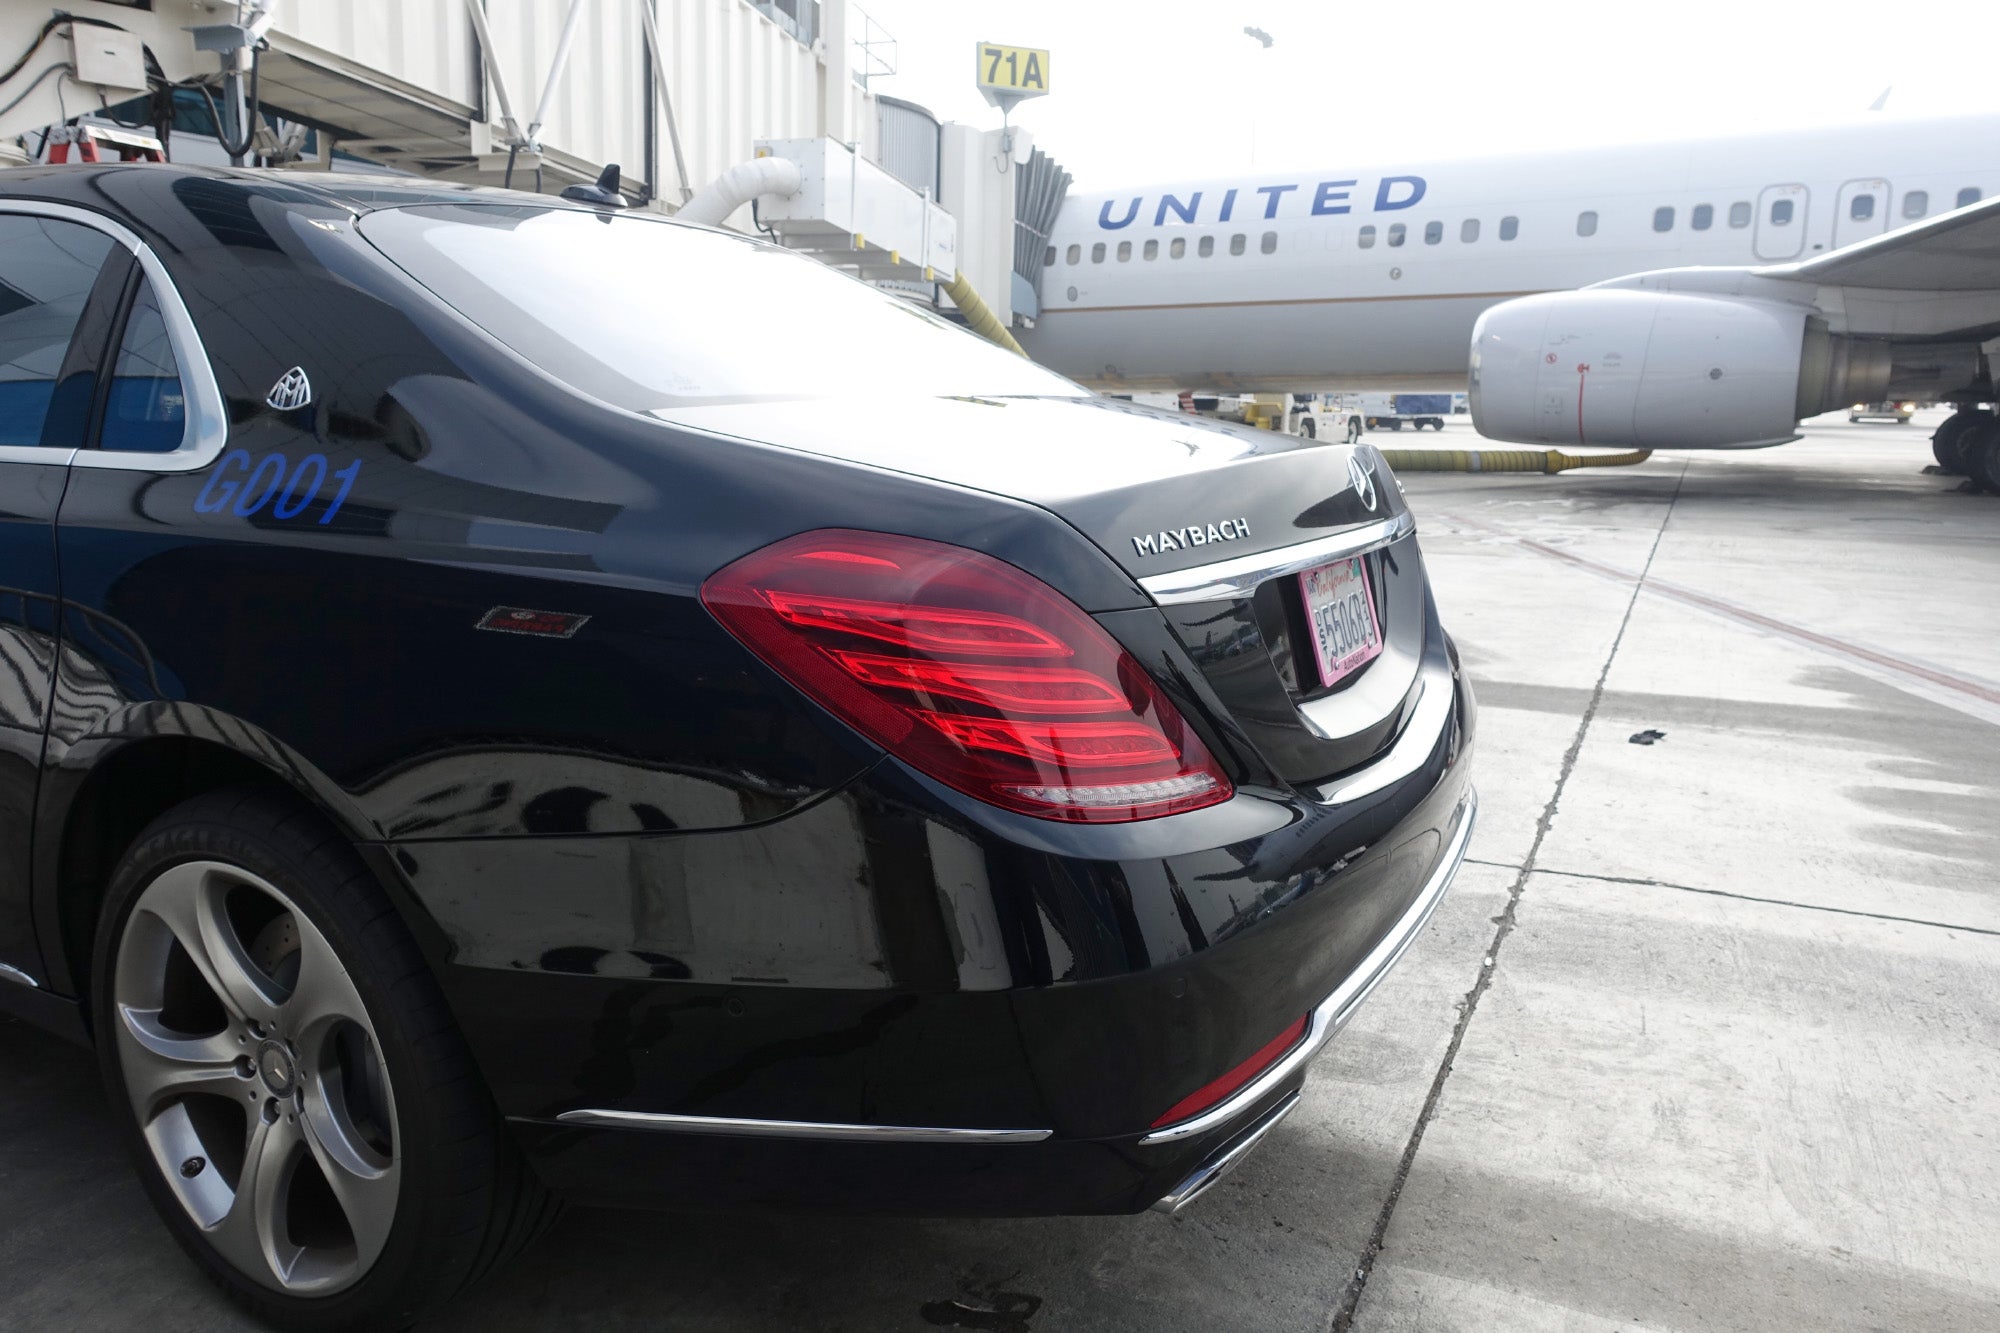 united airlines global services maybach